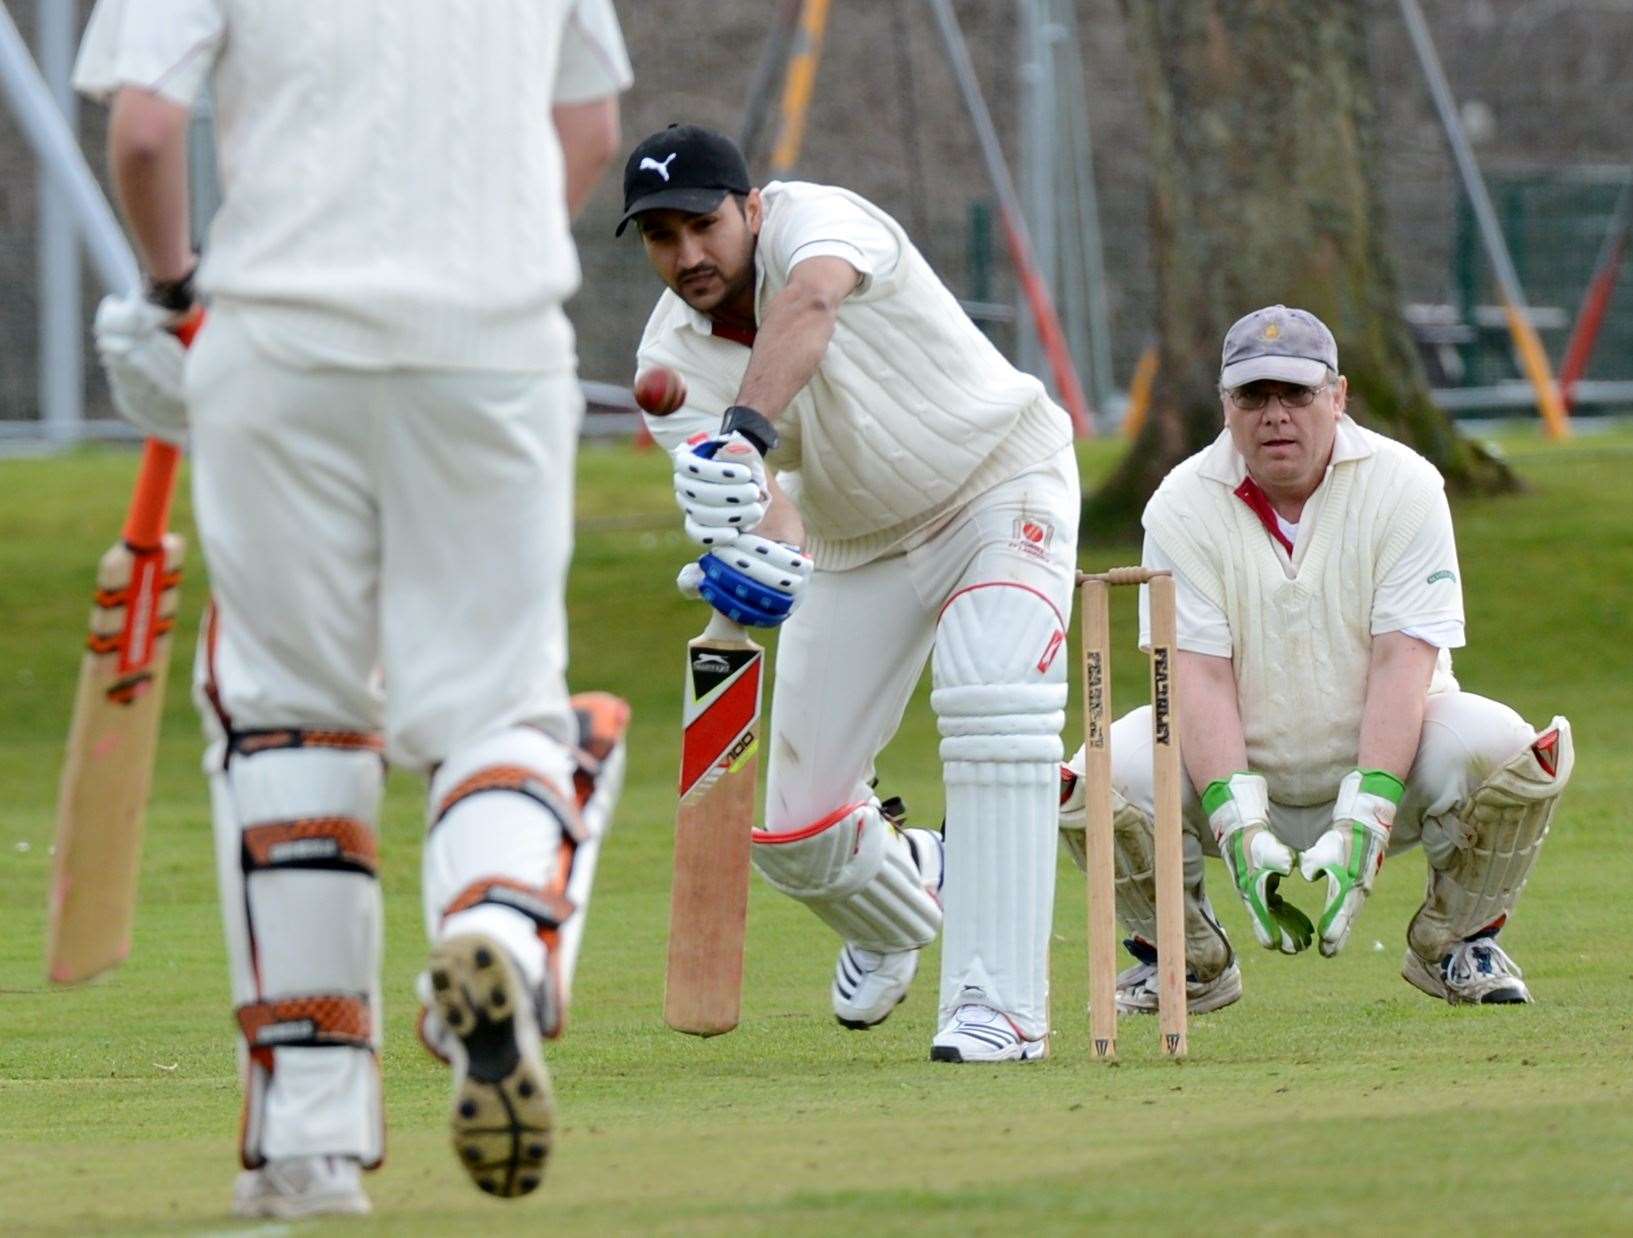 North cricket action. Picture: Gary Anthony